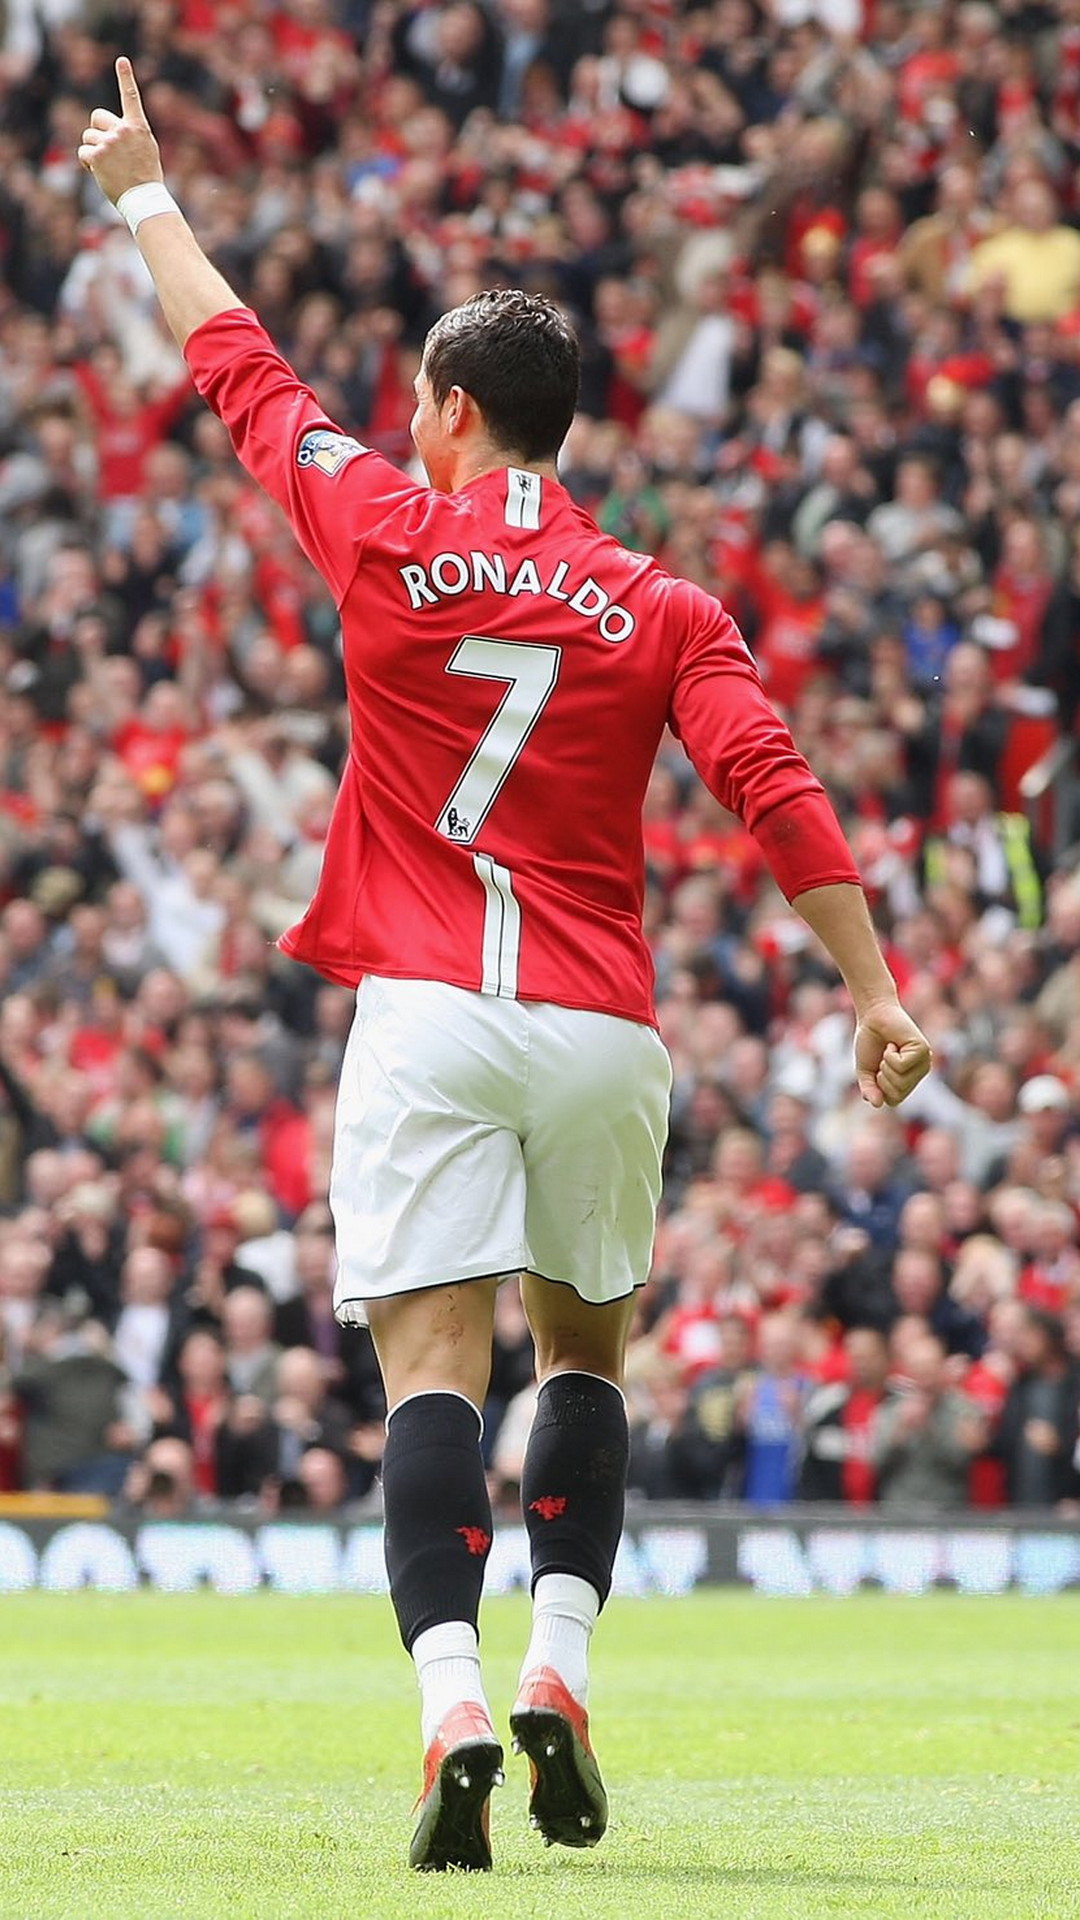 Cristiano Ronaldo Manchester United HD Wallpaper For iPhone With high-resolution 1080X1920 pixel. You can use this wallpaper for your Desktop Computers, Mac Screensavers, Windows Backgrounds, iPhone Wallpapers, Tablet or Android Lock screen and another Mobile device